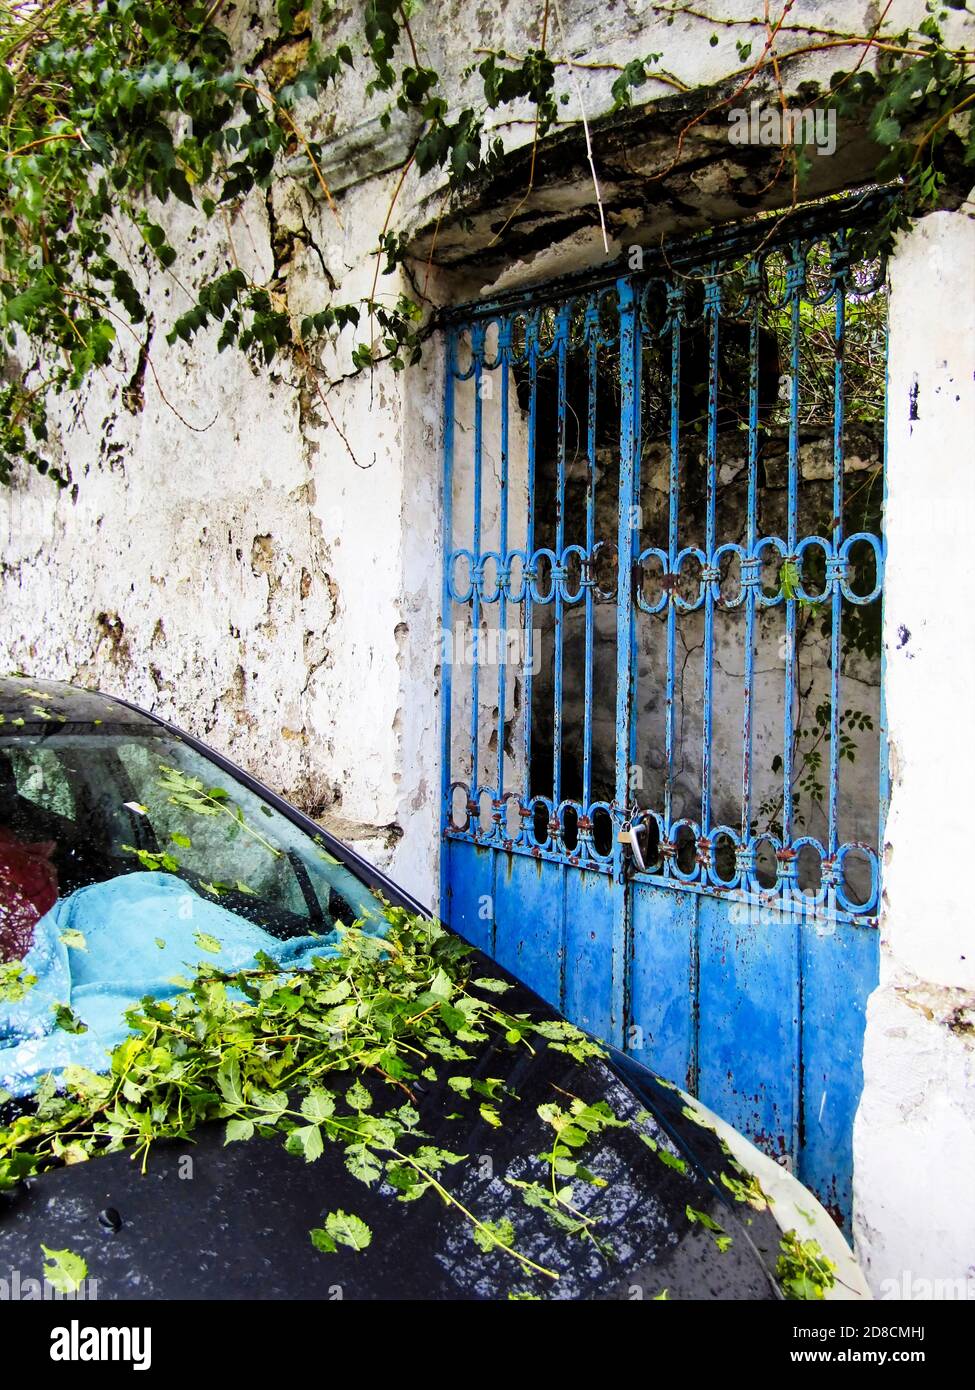 Old Doors on the entrance of a house and leaves on Parked car after heavy rain and wind, Galatas Village, Crete, Greece Stock Photo